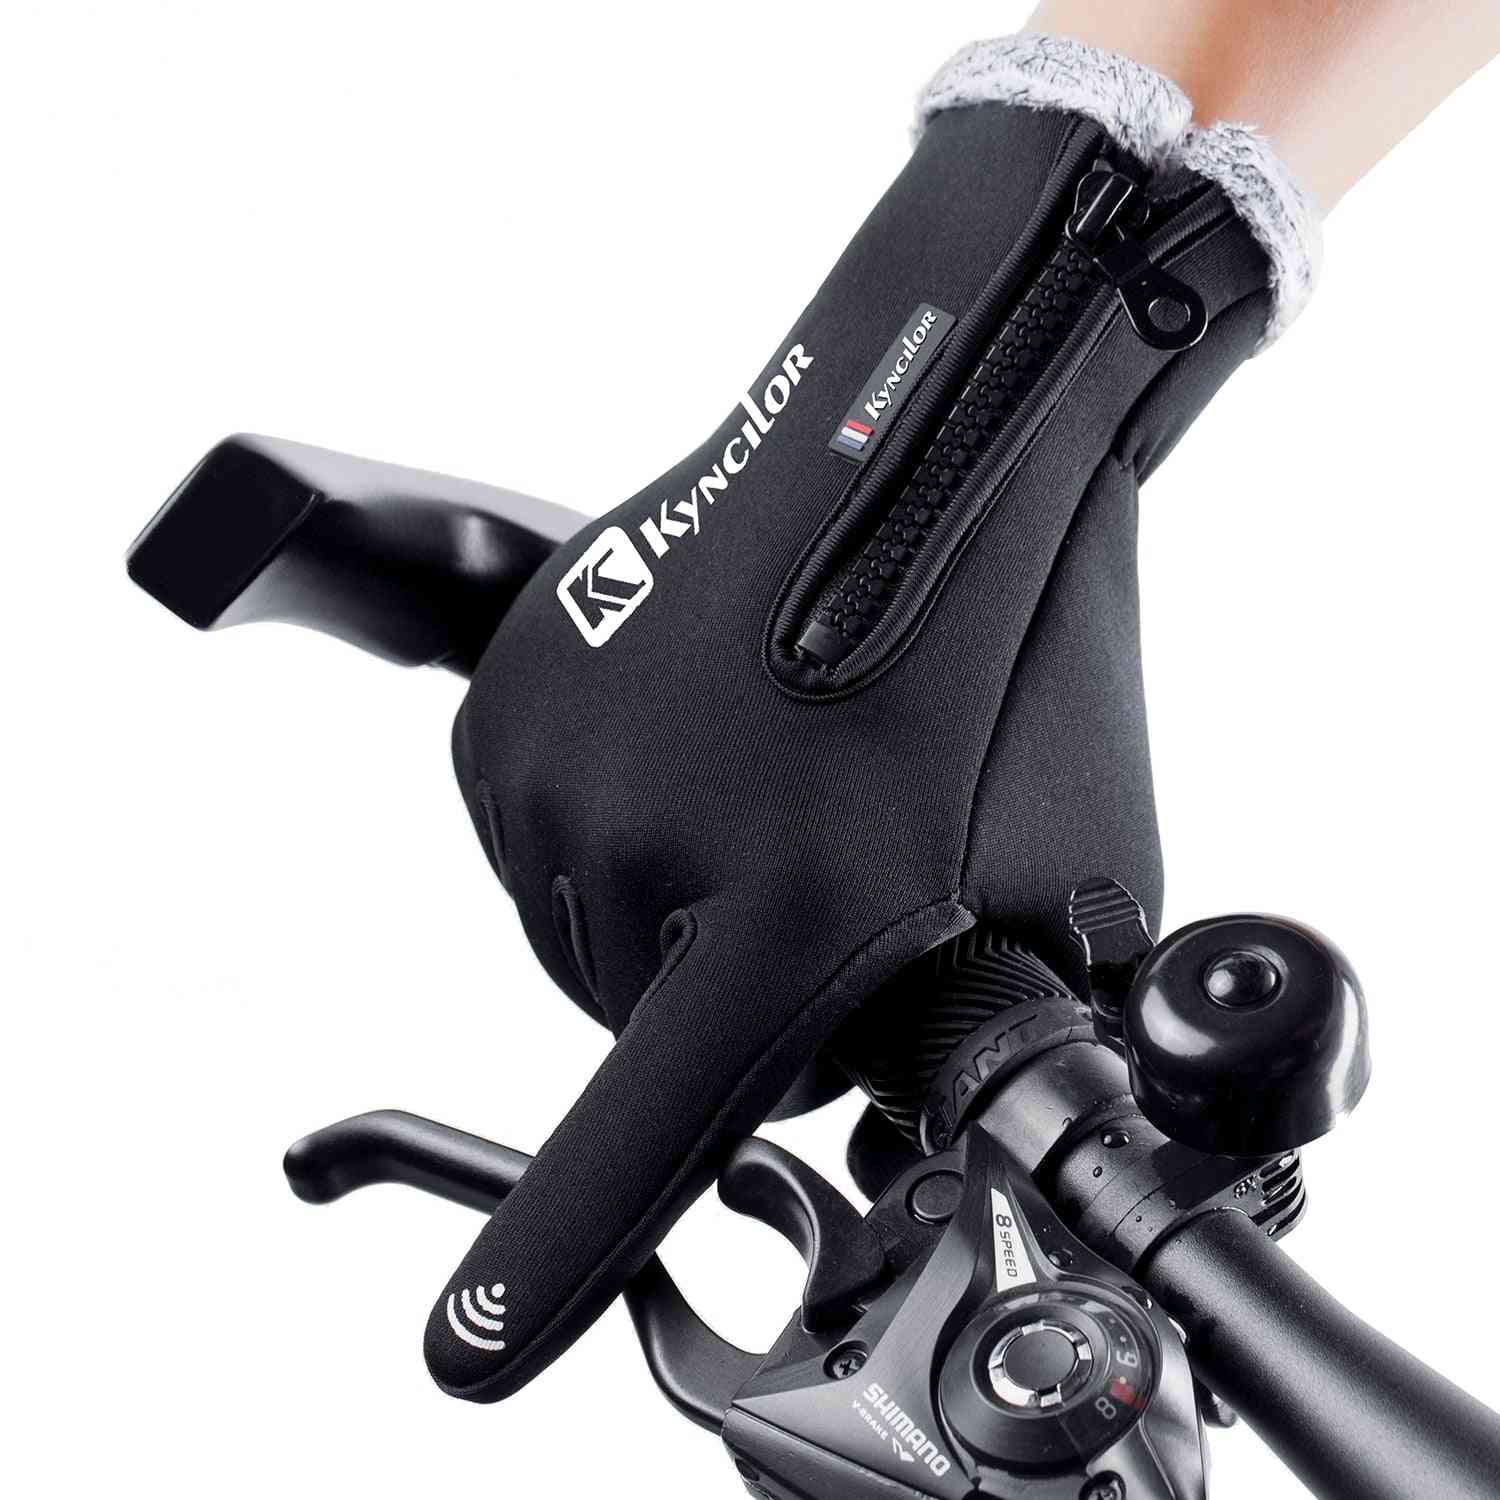 Winter Themal Touchscreen Gloves, Anti-slip Windproof Cycling Glove